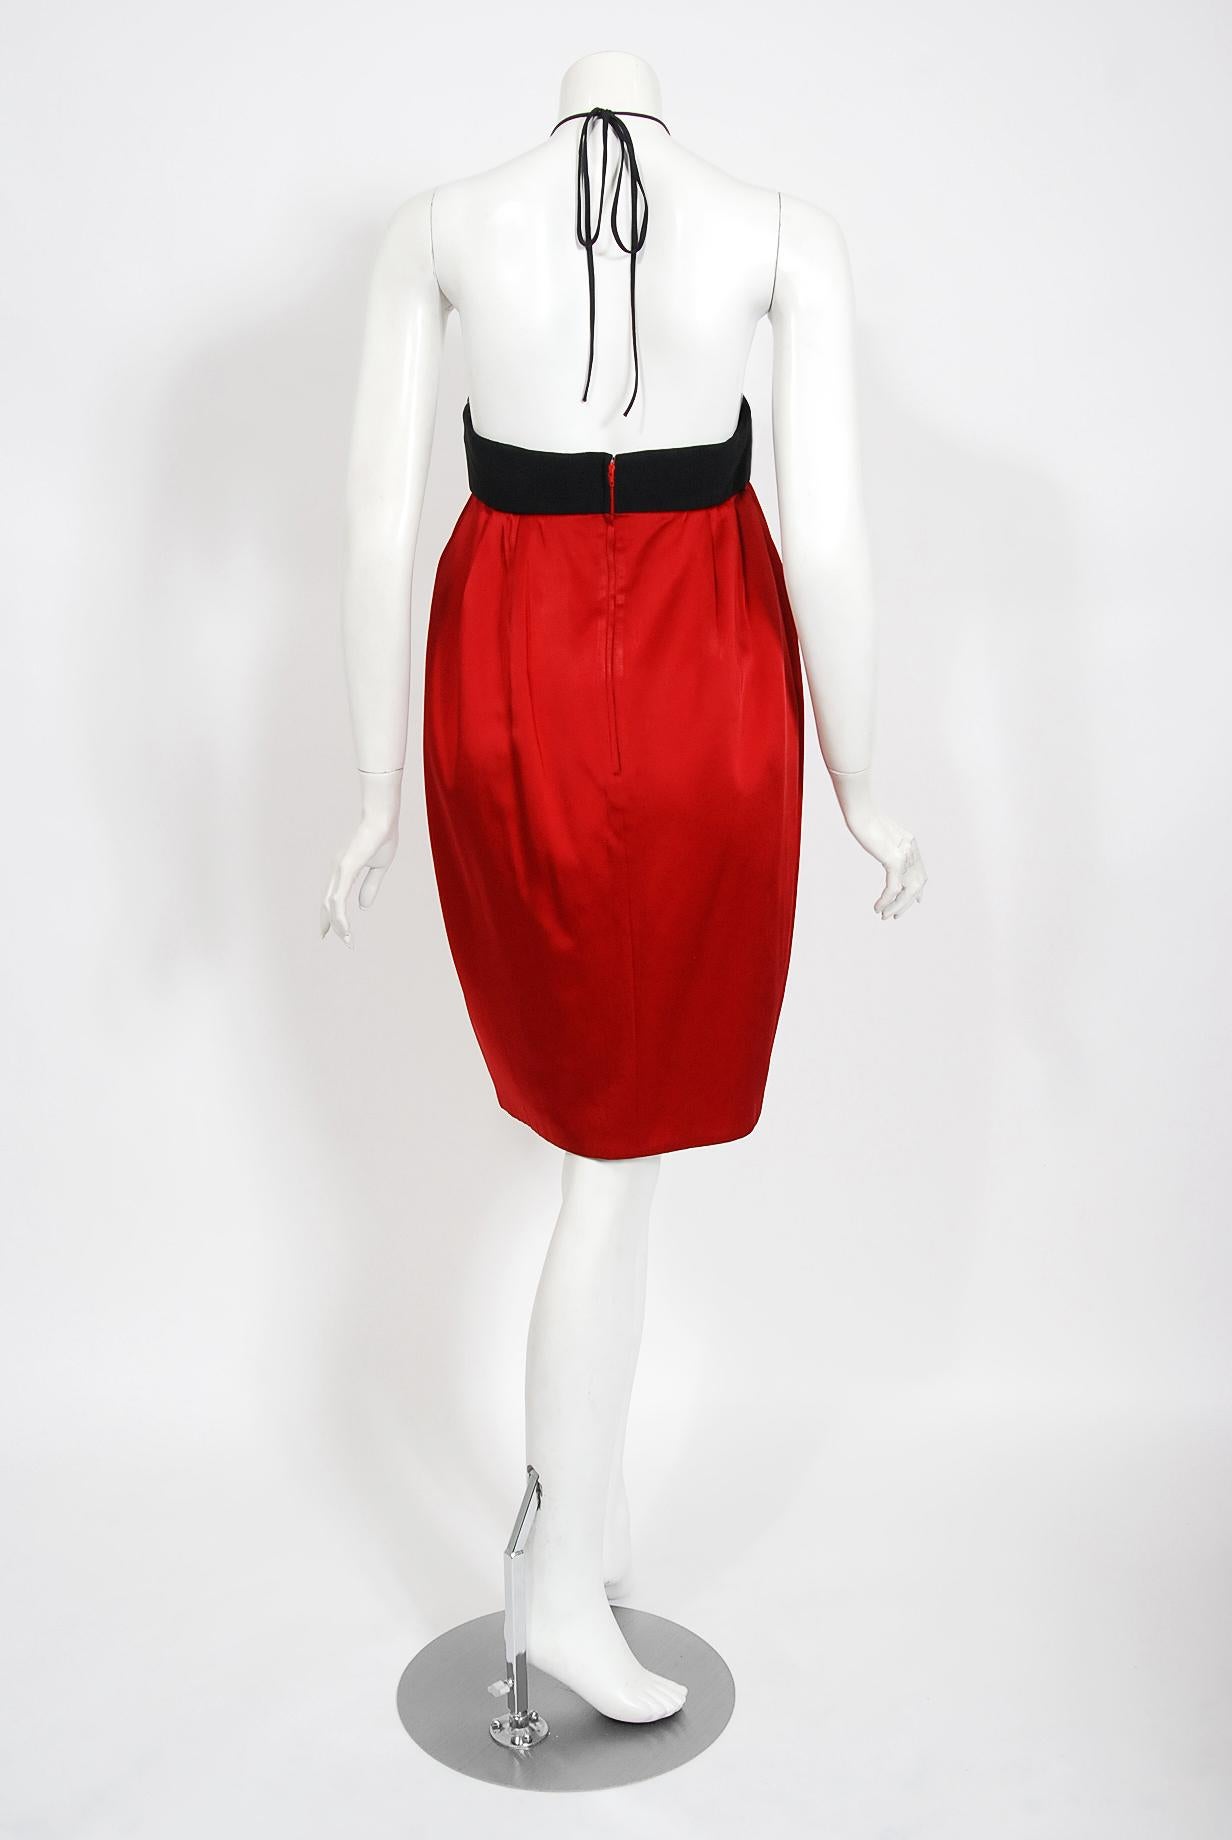 Archival 1995 Moschino Couture 'Ladybug' Novelty Black & Red Silk Halter Dress For Sale 4